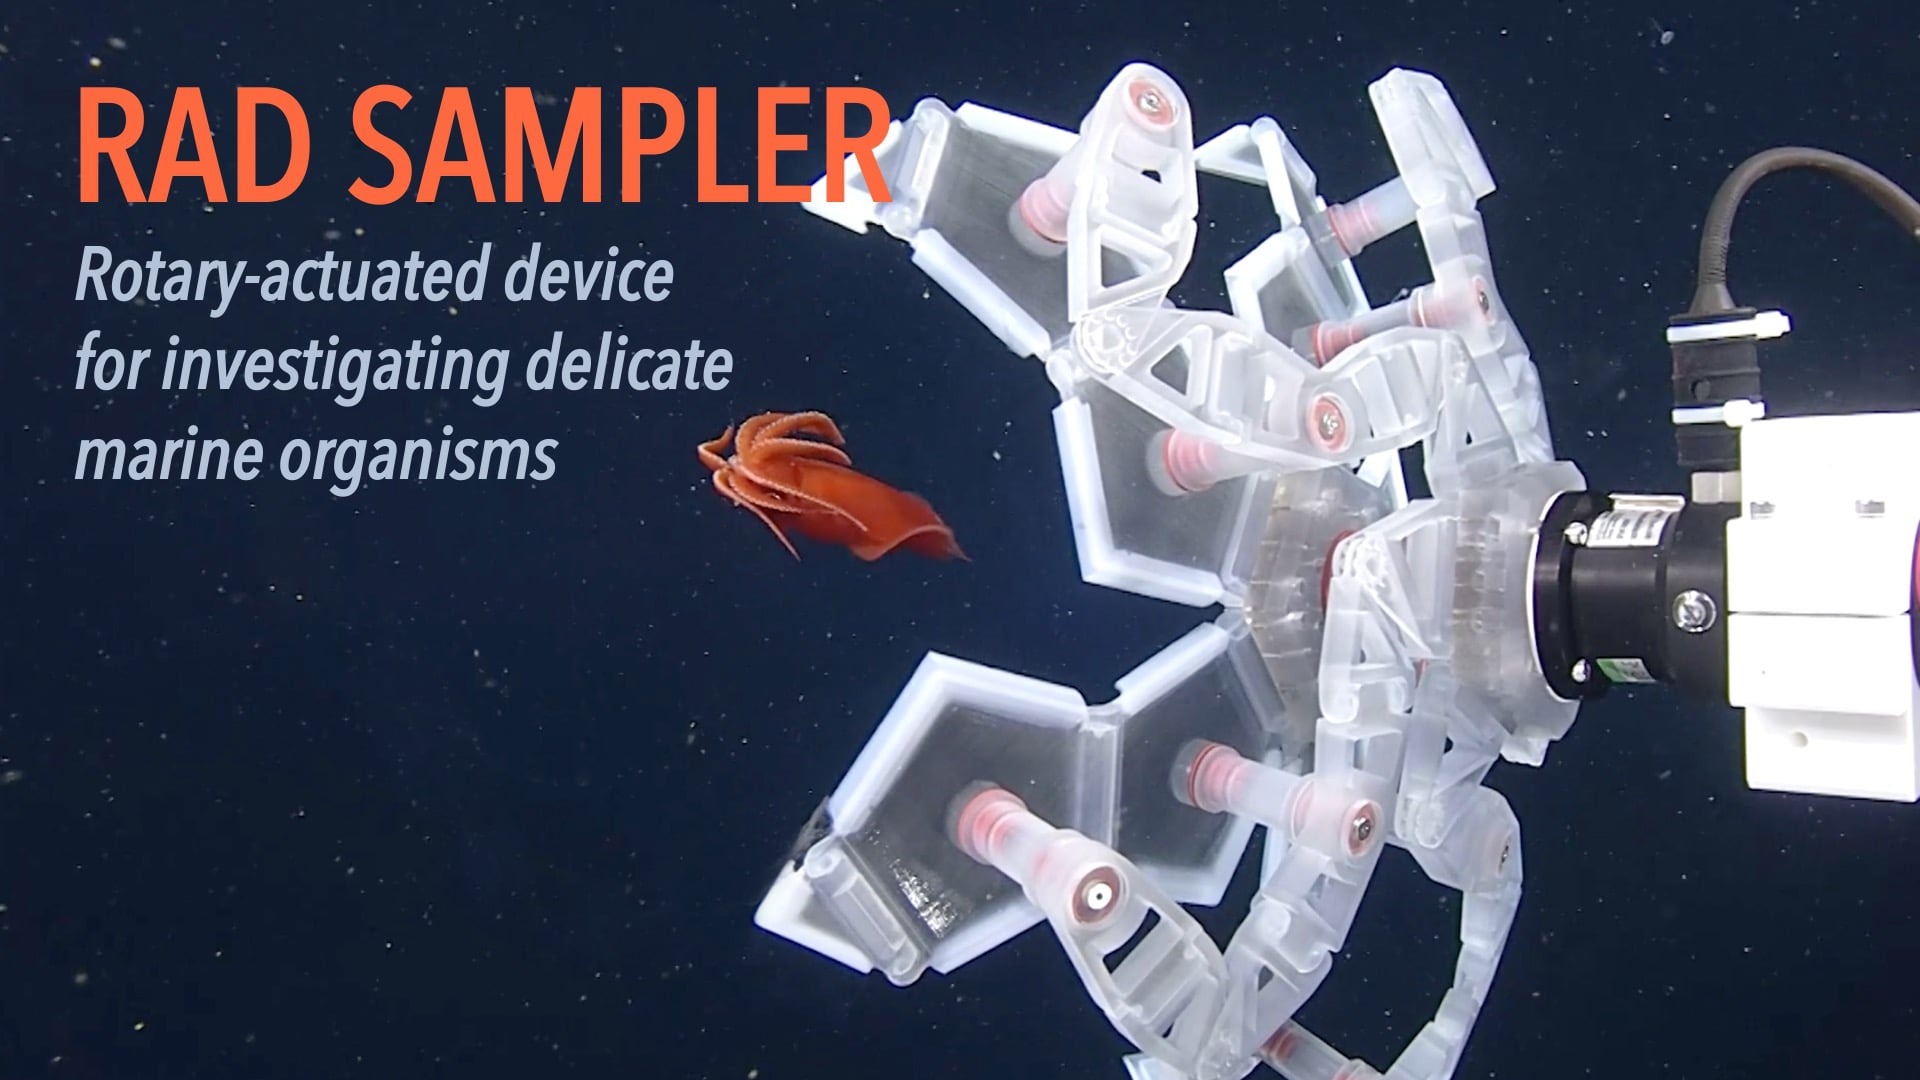 RAD Sampler: Rotary-actuated device for investigating delicate marine organisms